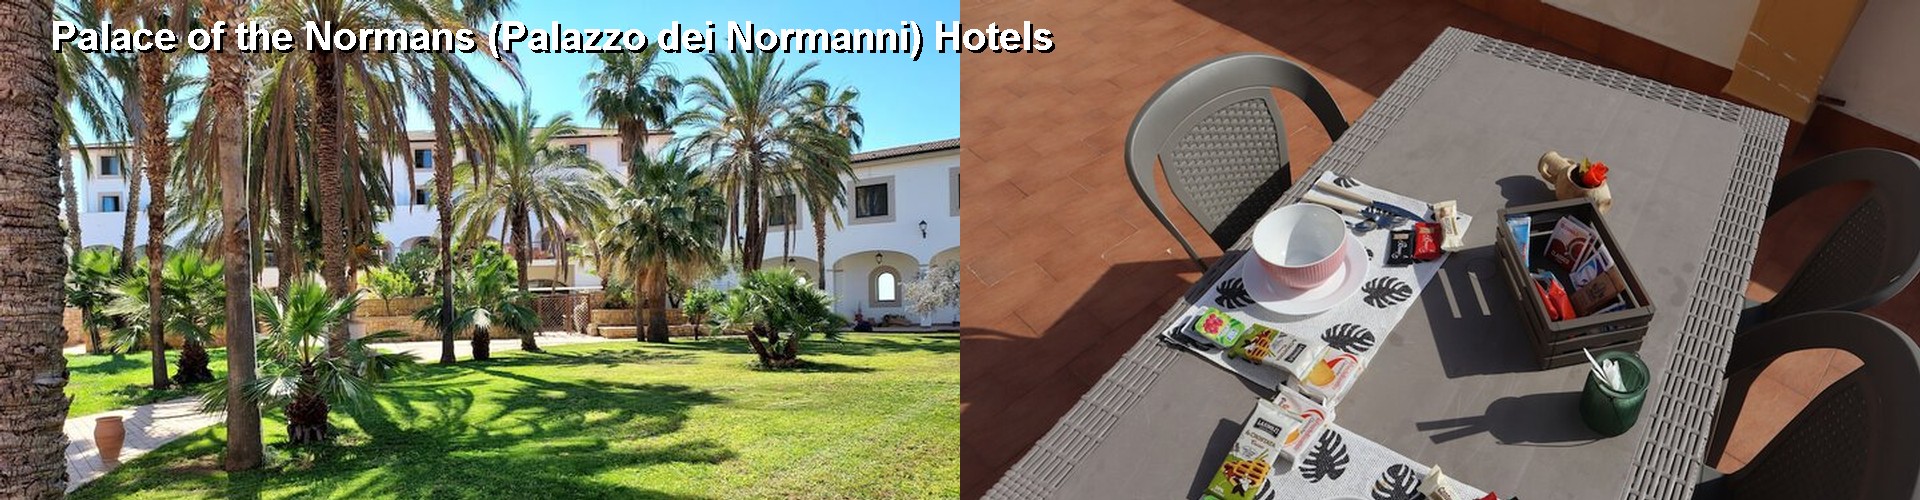 5 Best Hotels near Palace of the Normans (Palazzo dei Normanni)